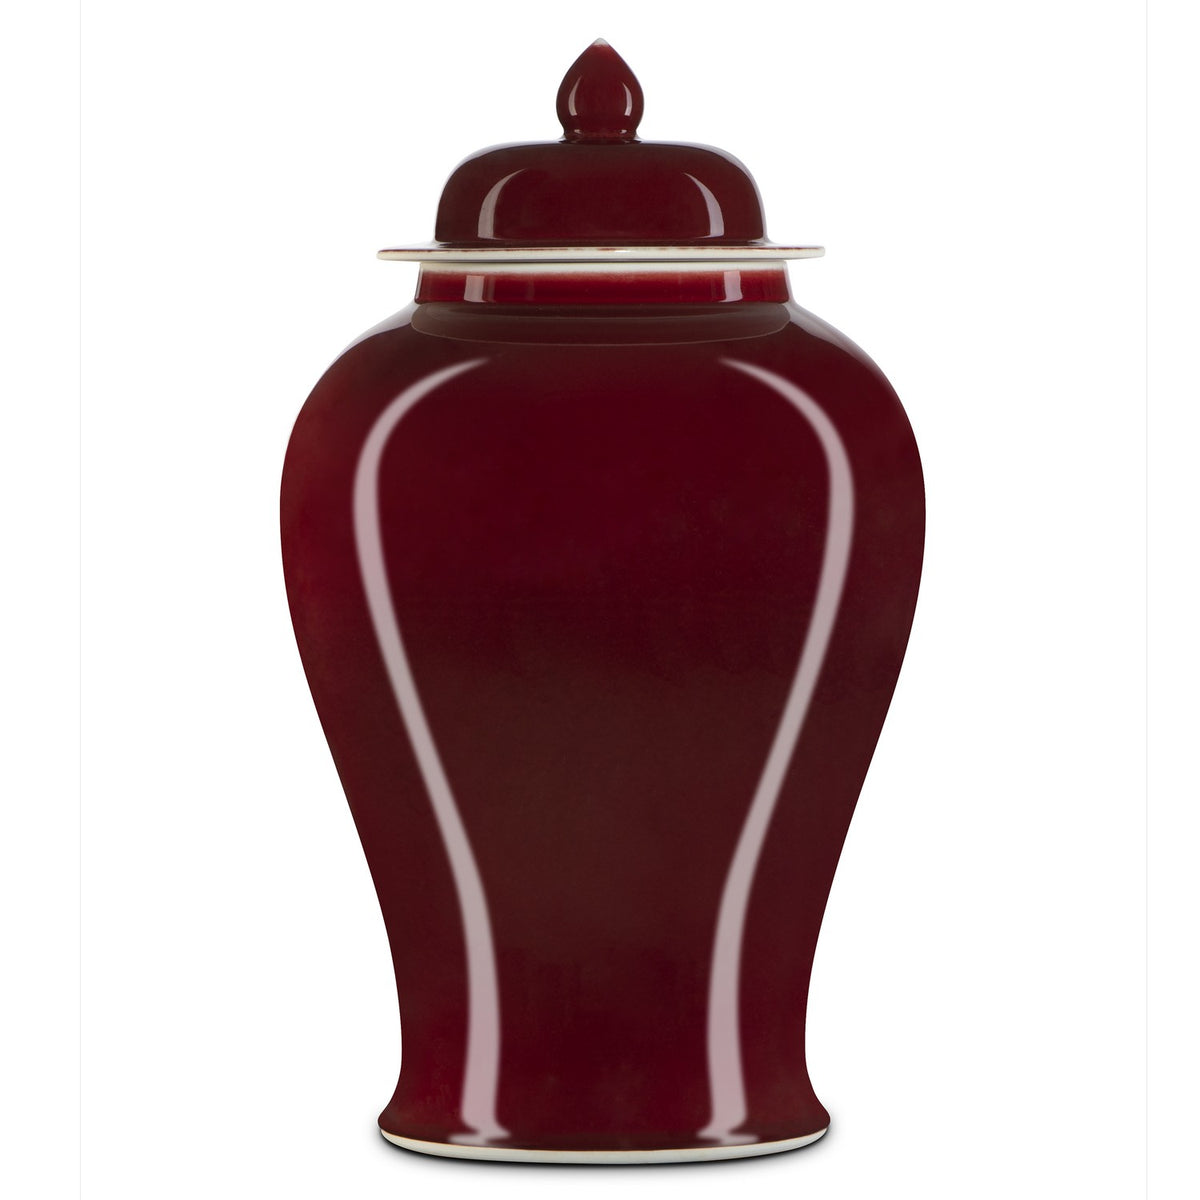 Currey and Company - 1200-0686 - Jar - Oxblood - Imperial Red